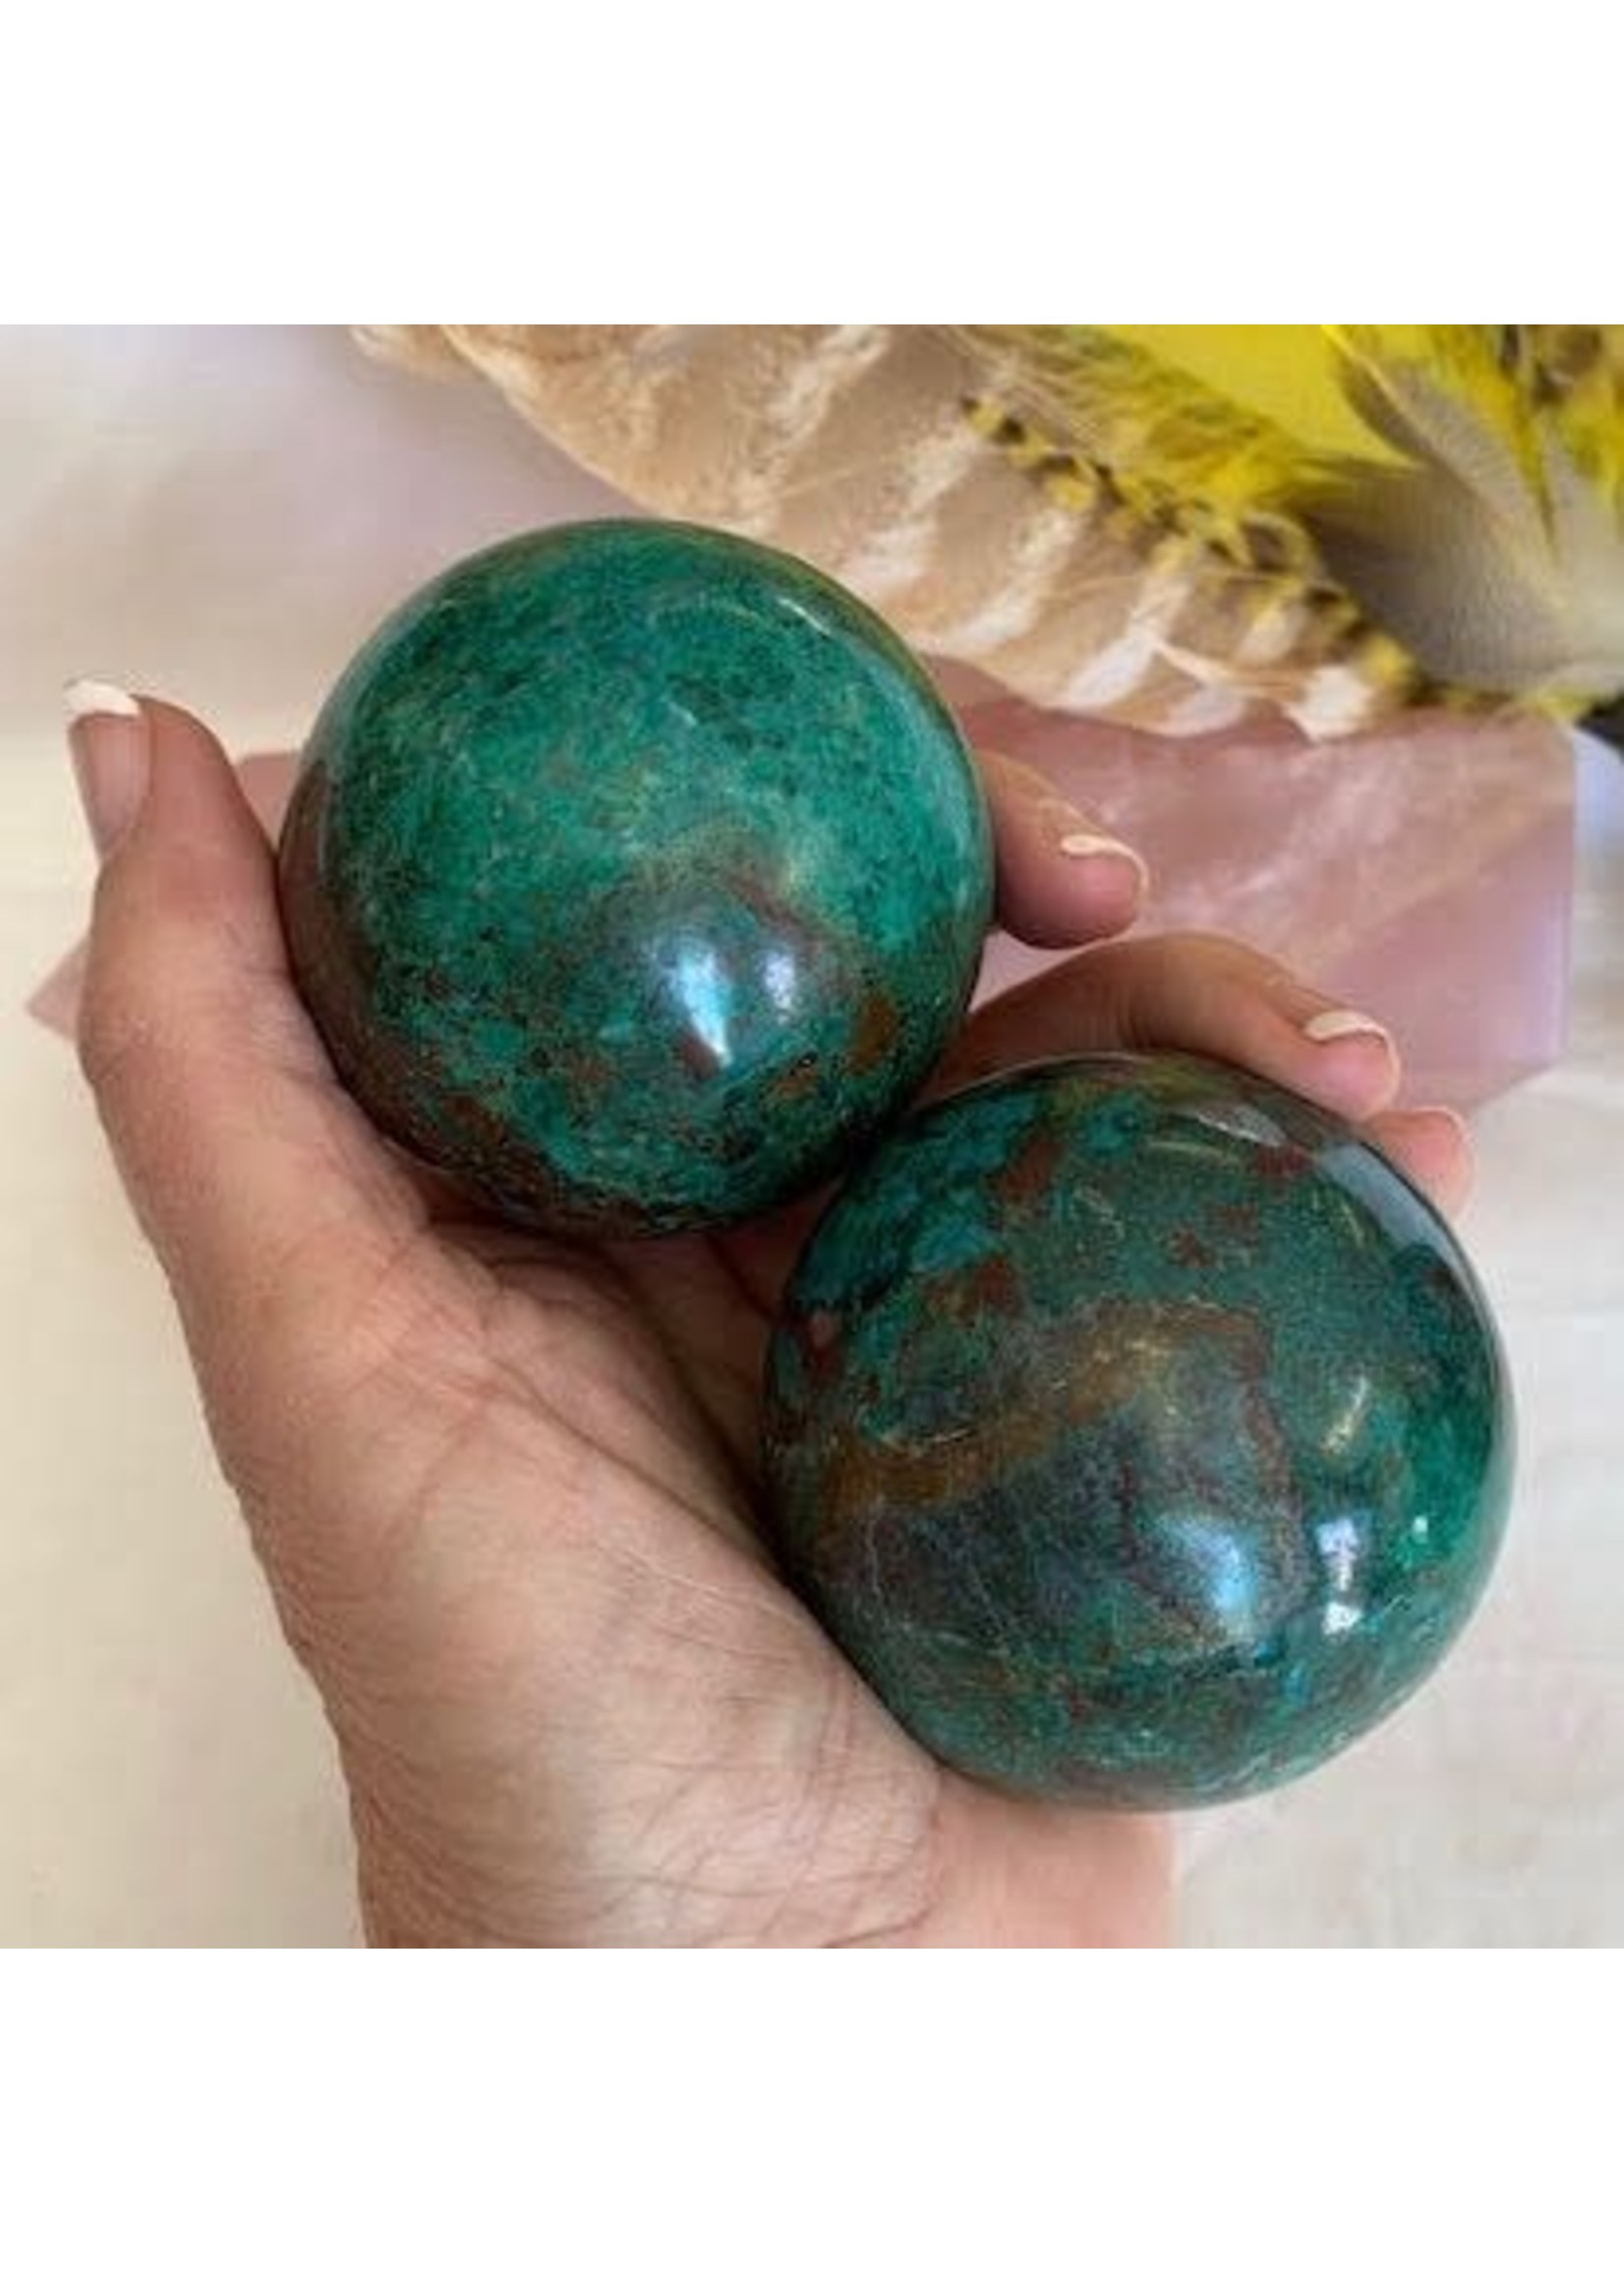 Chrysocolla Sphere to step into your Goddess energy